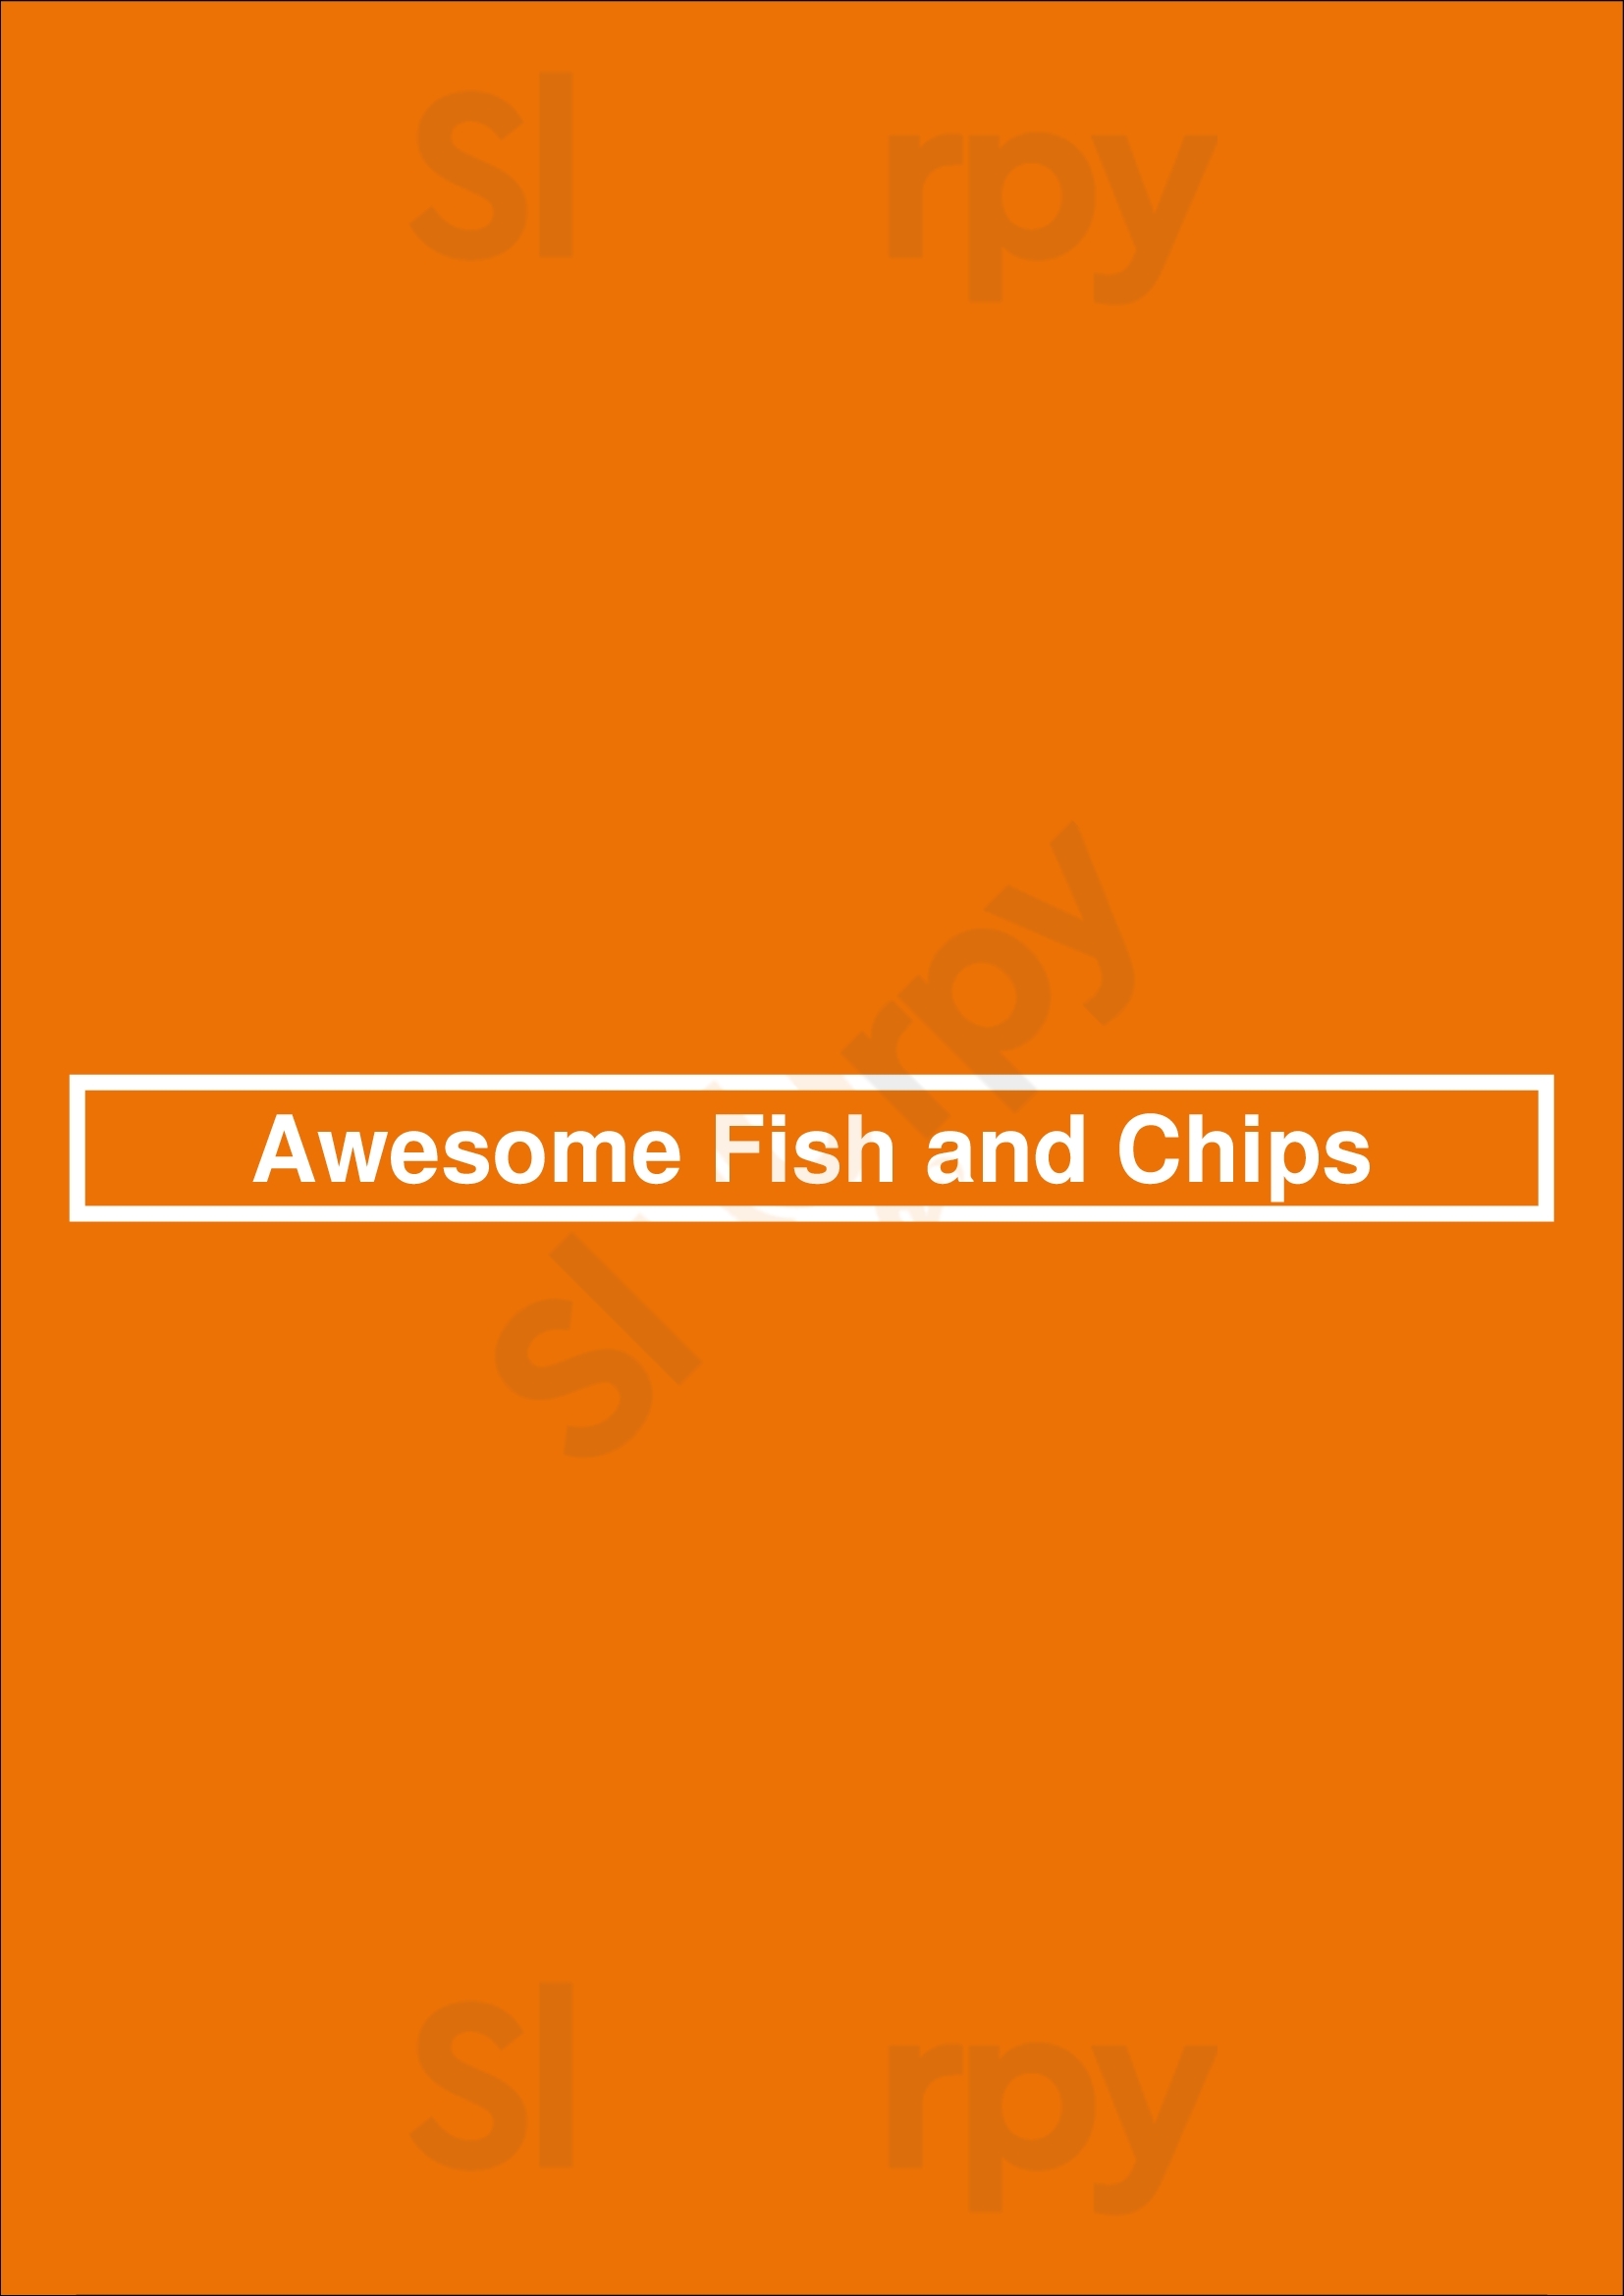 Awesome Fish And Chips London Menu - 1